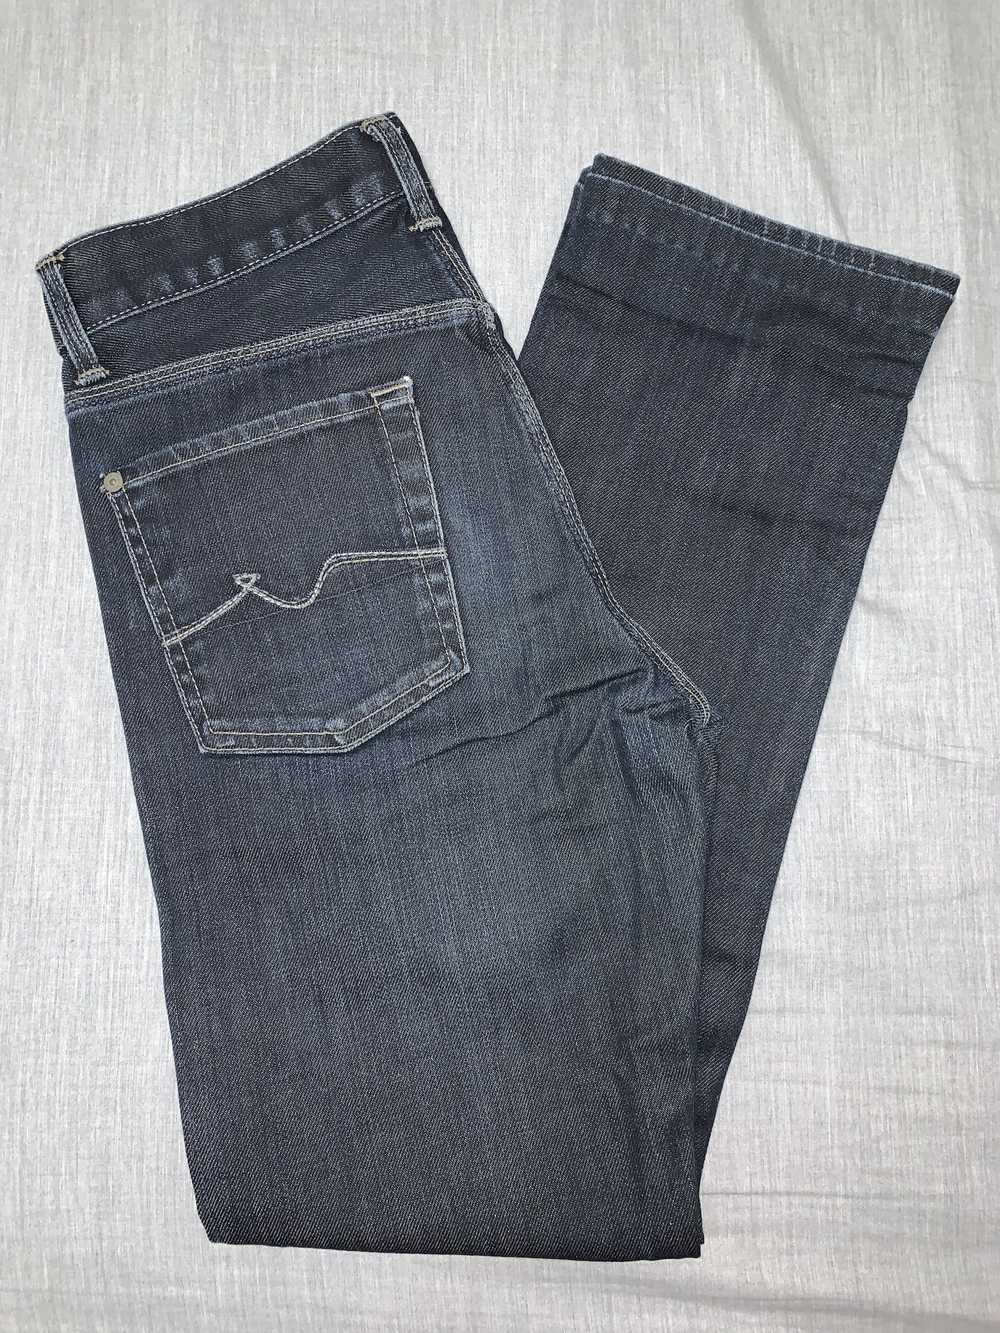 7 For All Mankind 7 for all mankind Slimmy Jeans - image 2